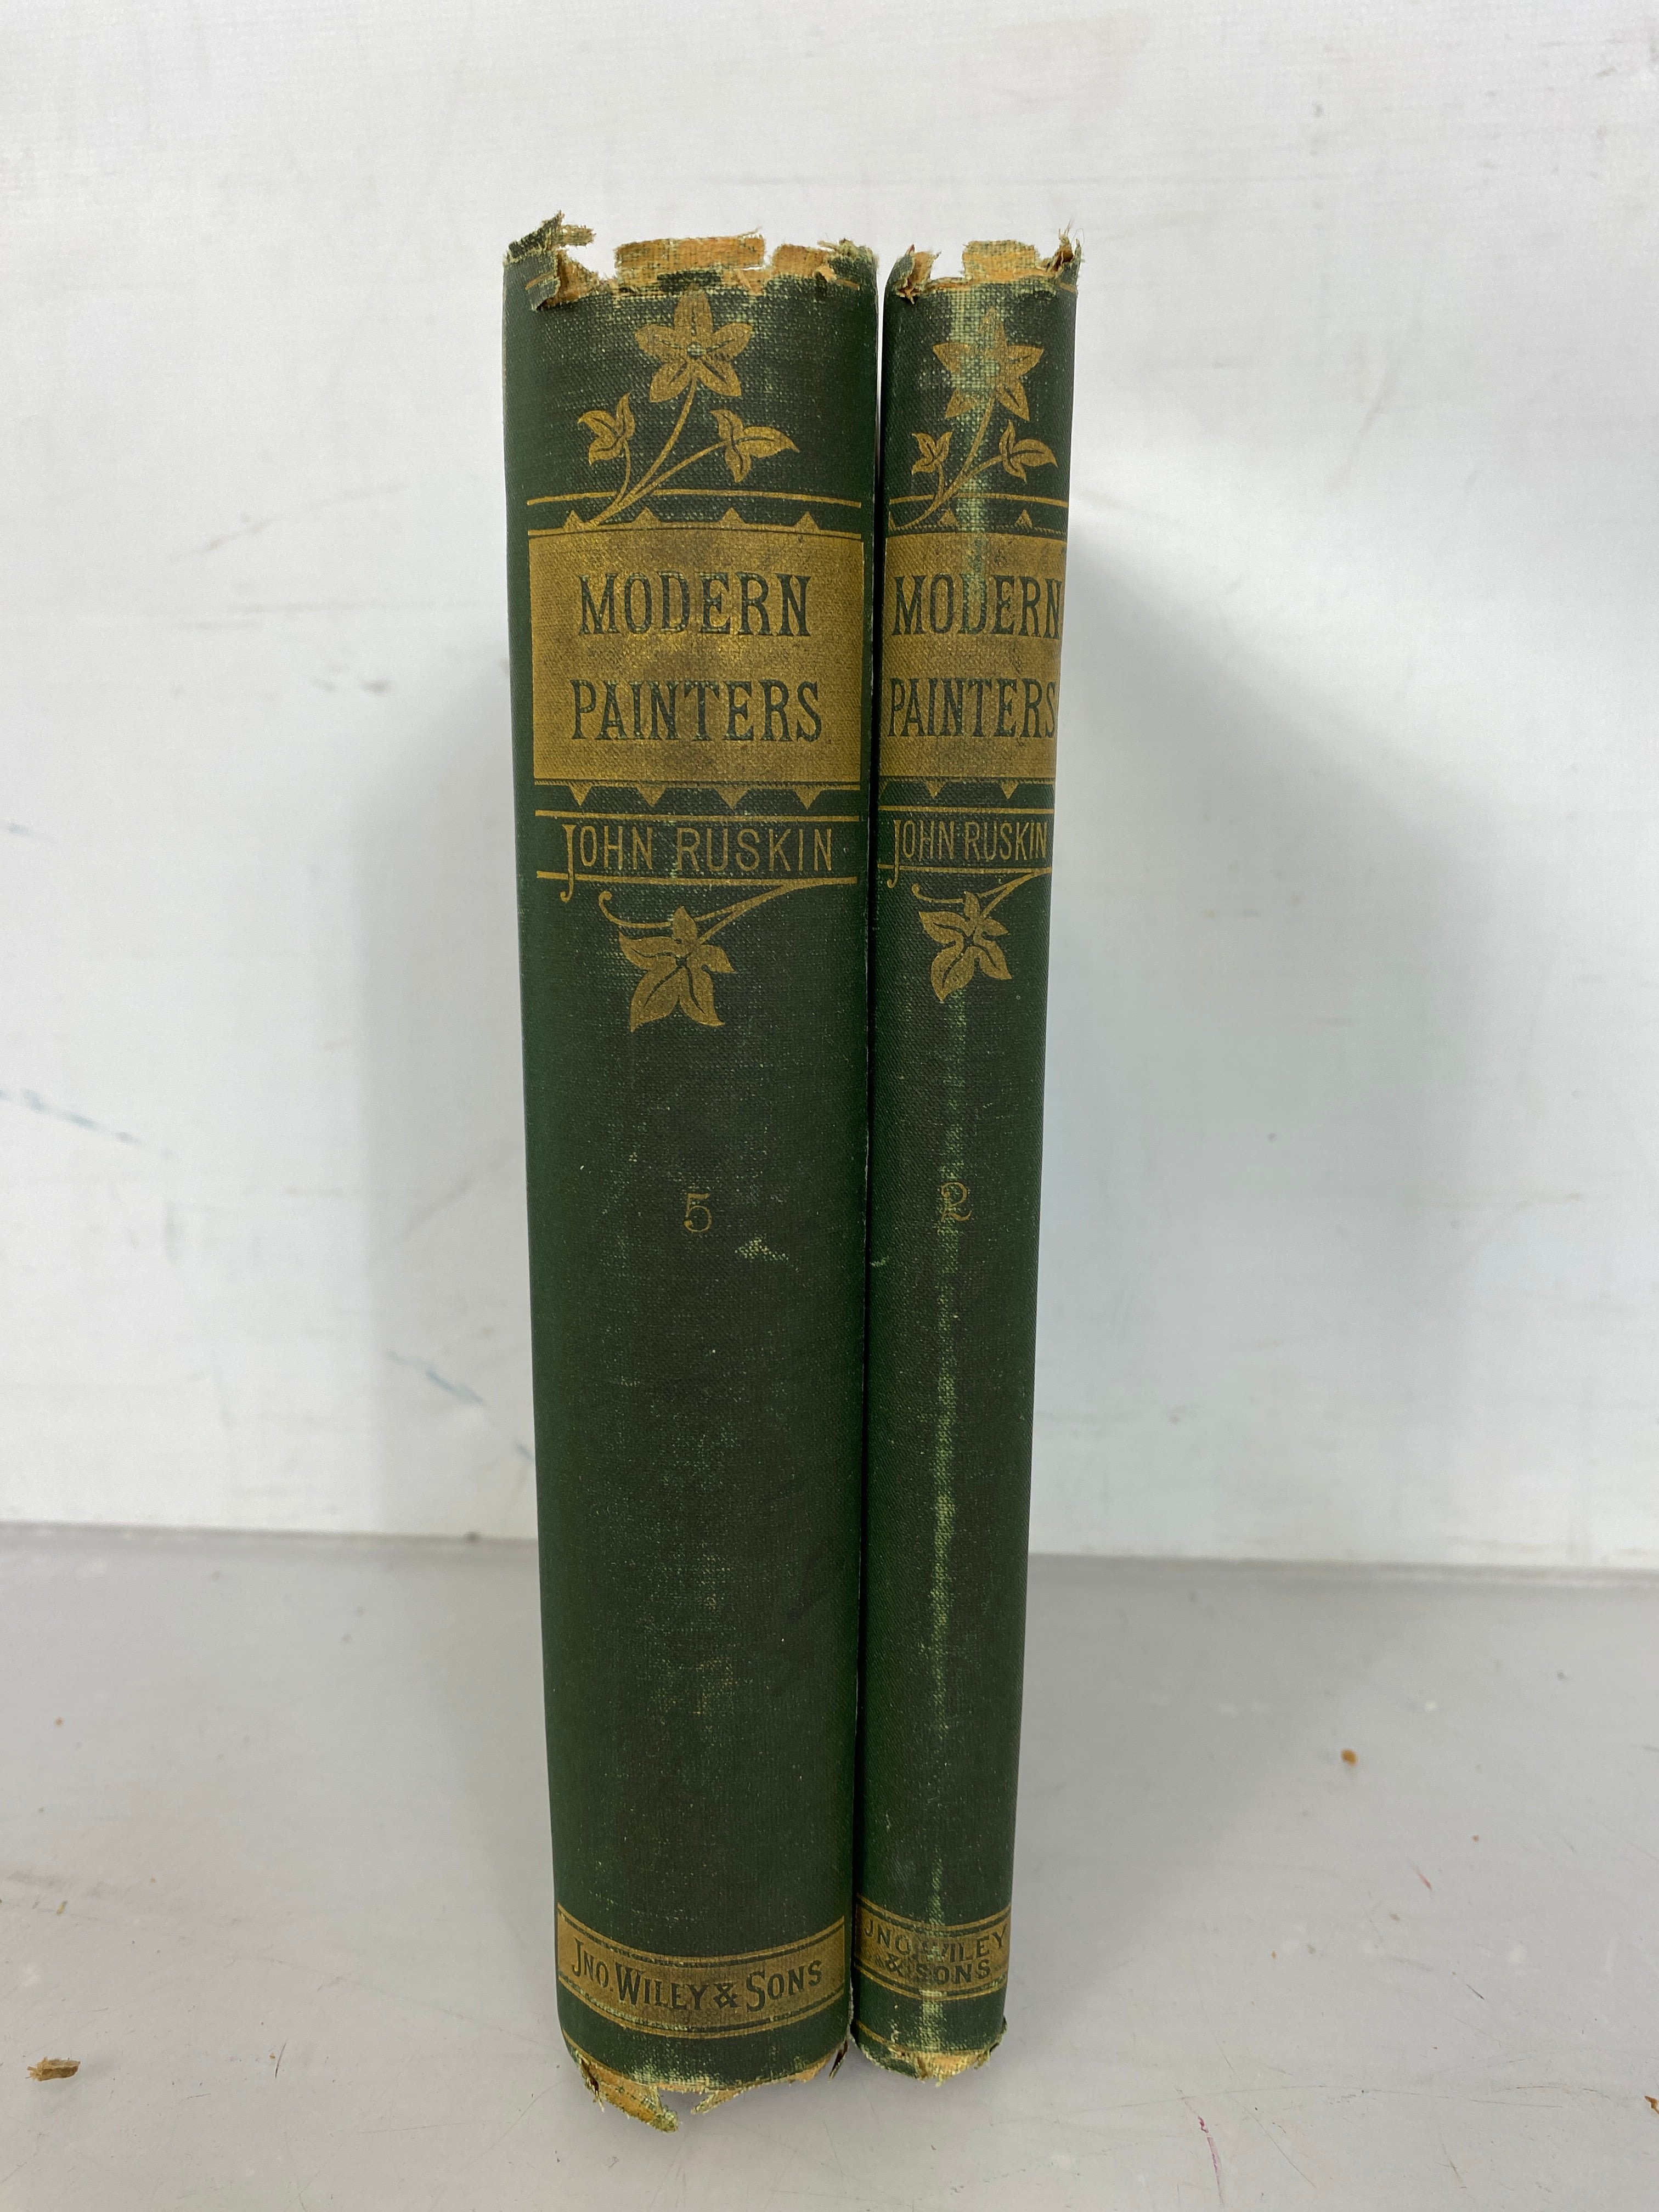 2 Volumes (II and V) of Modern Painters by John Ruskin 1878 John Wiley & Sons HC